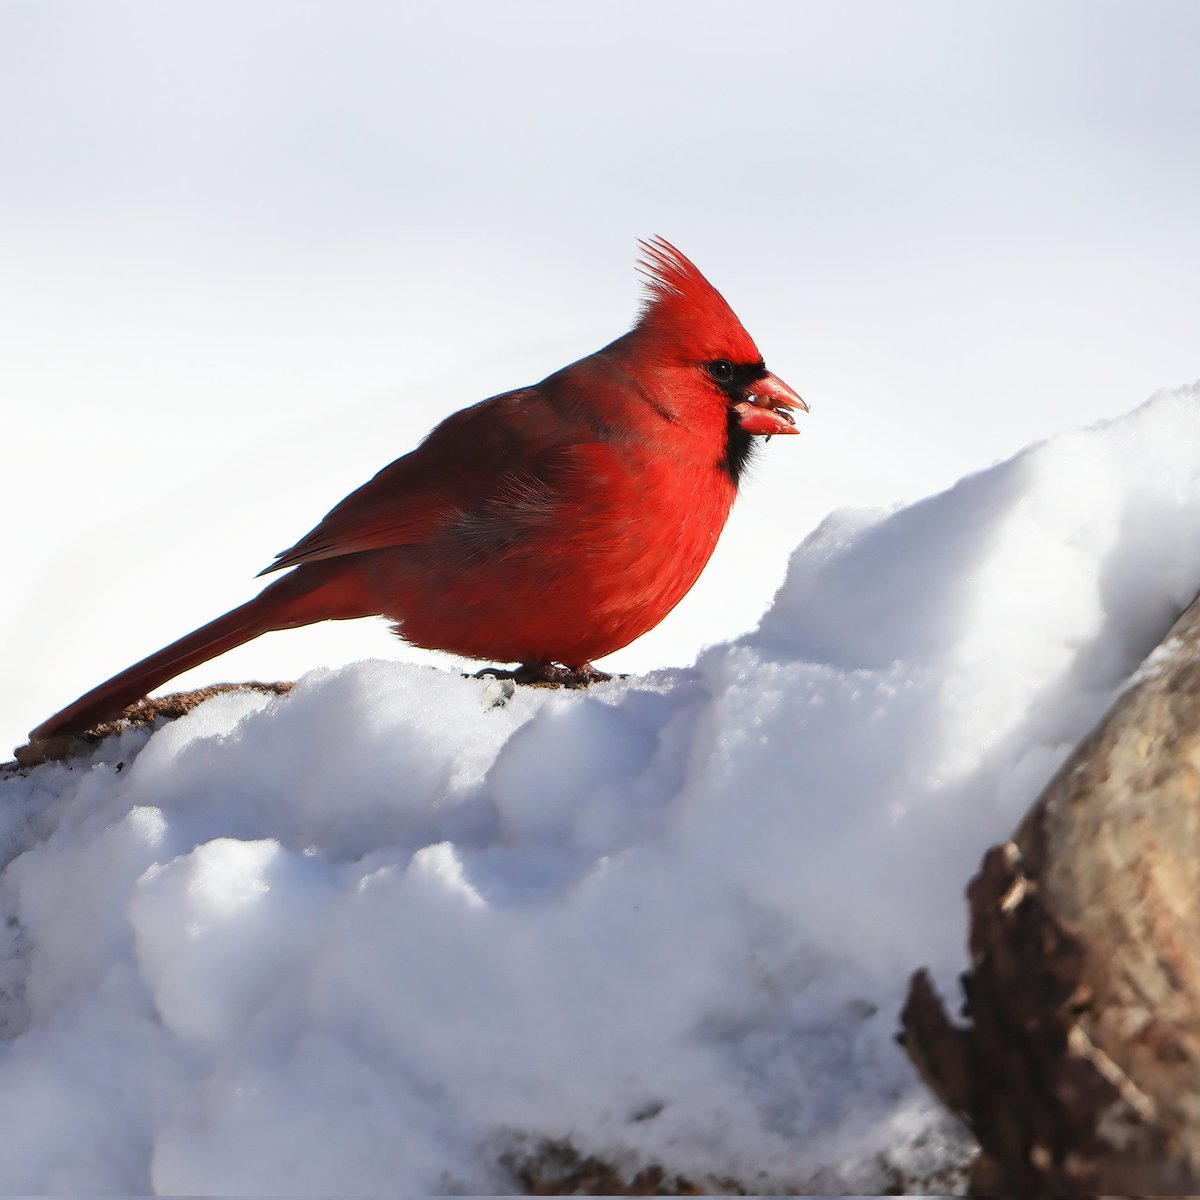 A few more snow pics before we switch over to spring... here we have a handsome male cardinal enjoying a sunflower seed...
#snowpic #malecardinal #malecardinals #cardinals #cardinal #birding #ohiobirding #ohiobirdworld #ohiobirdlovers #ohiobirder #ohiobirds #birdlove #birdlovers